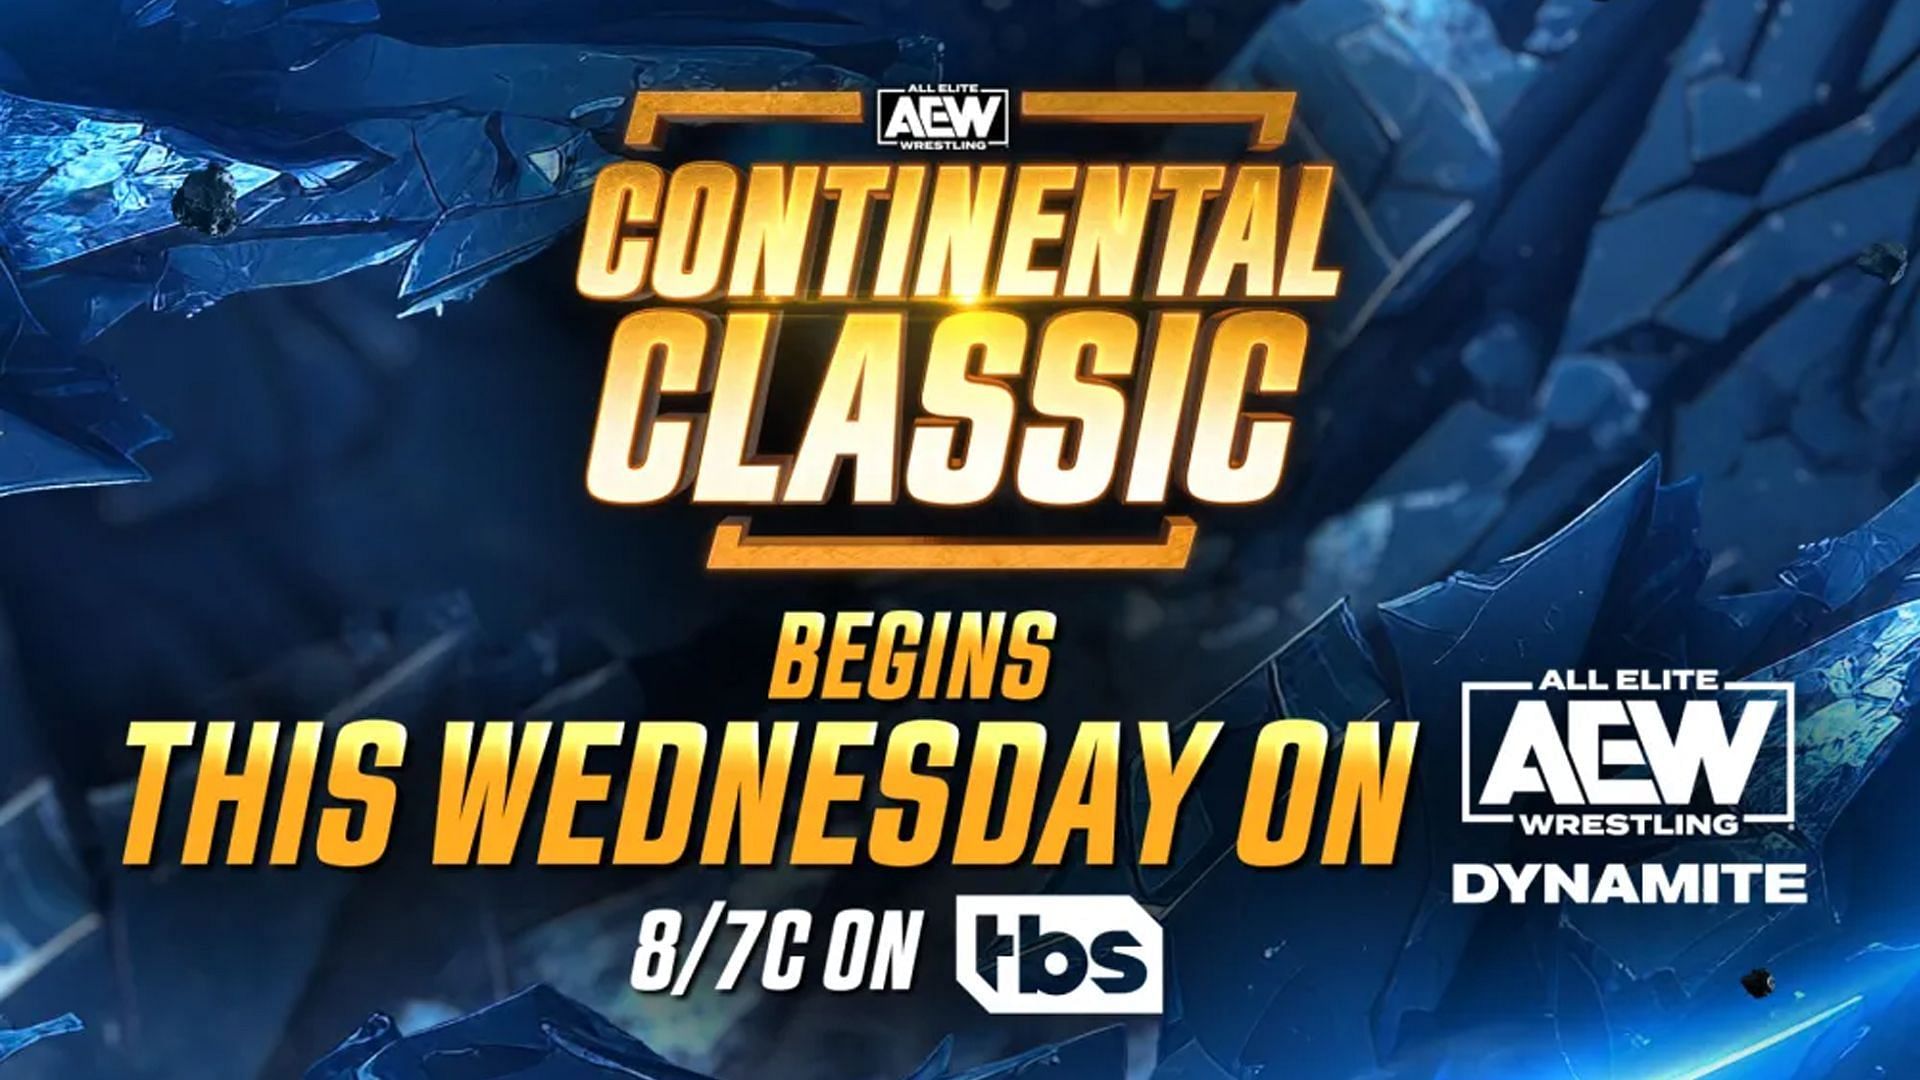 The Continental Classic begins tonight on AEW Dynamite